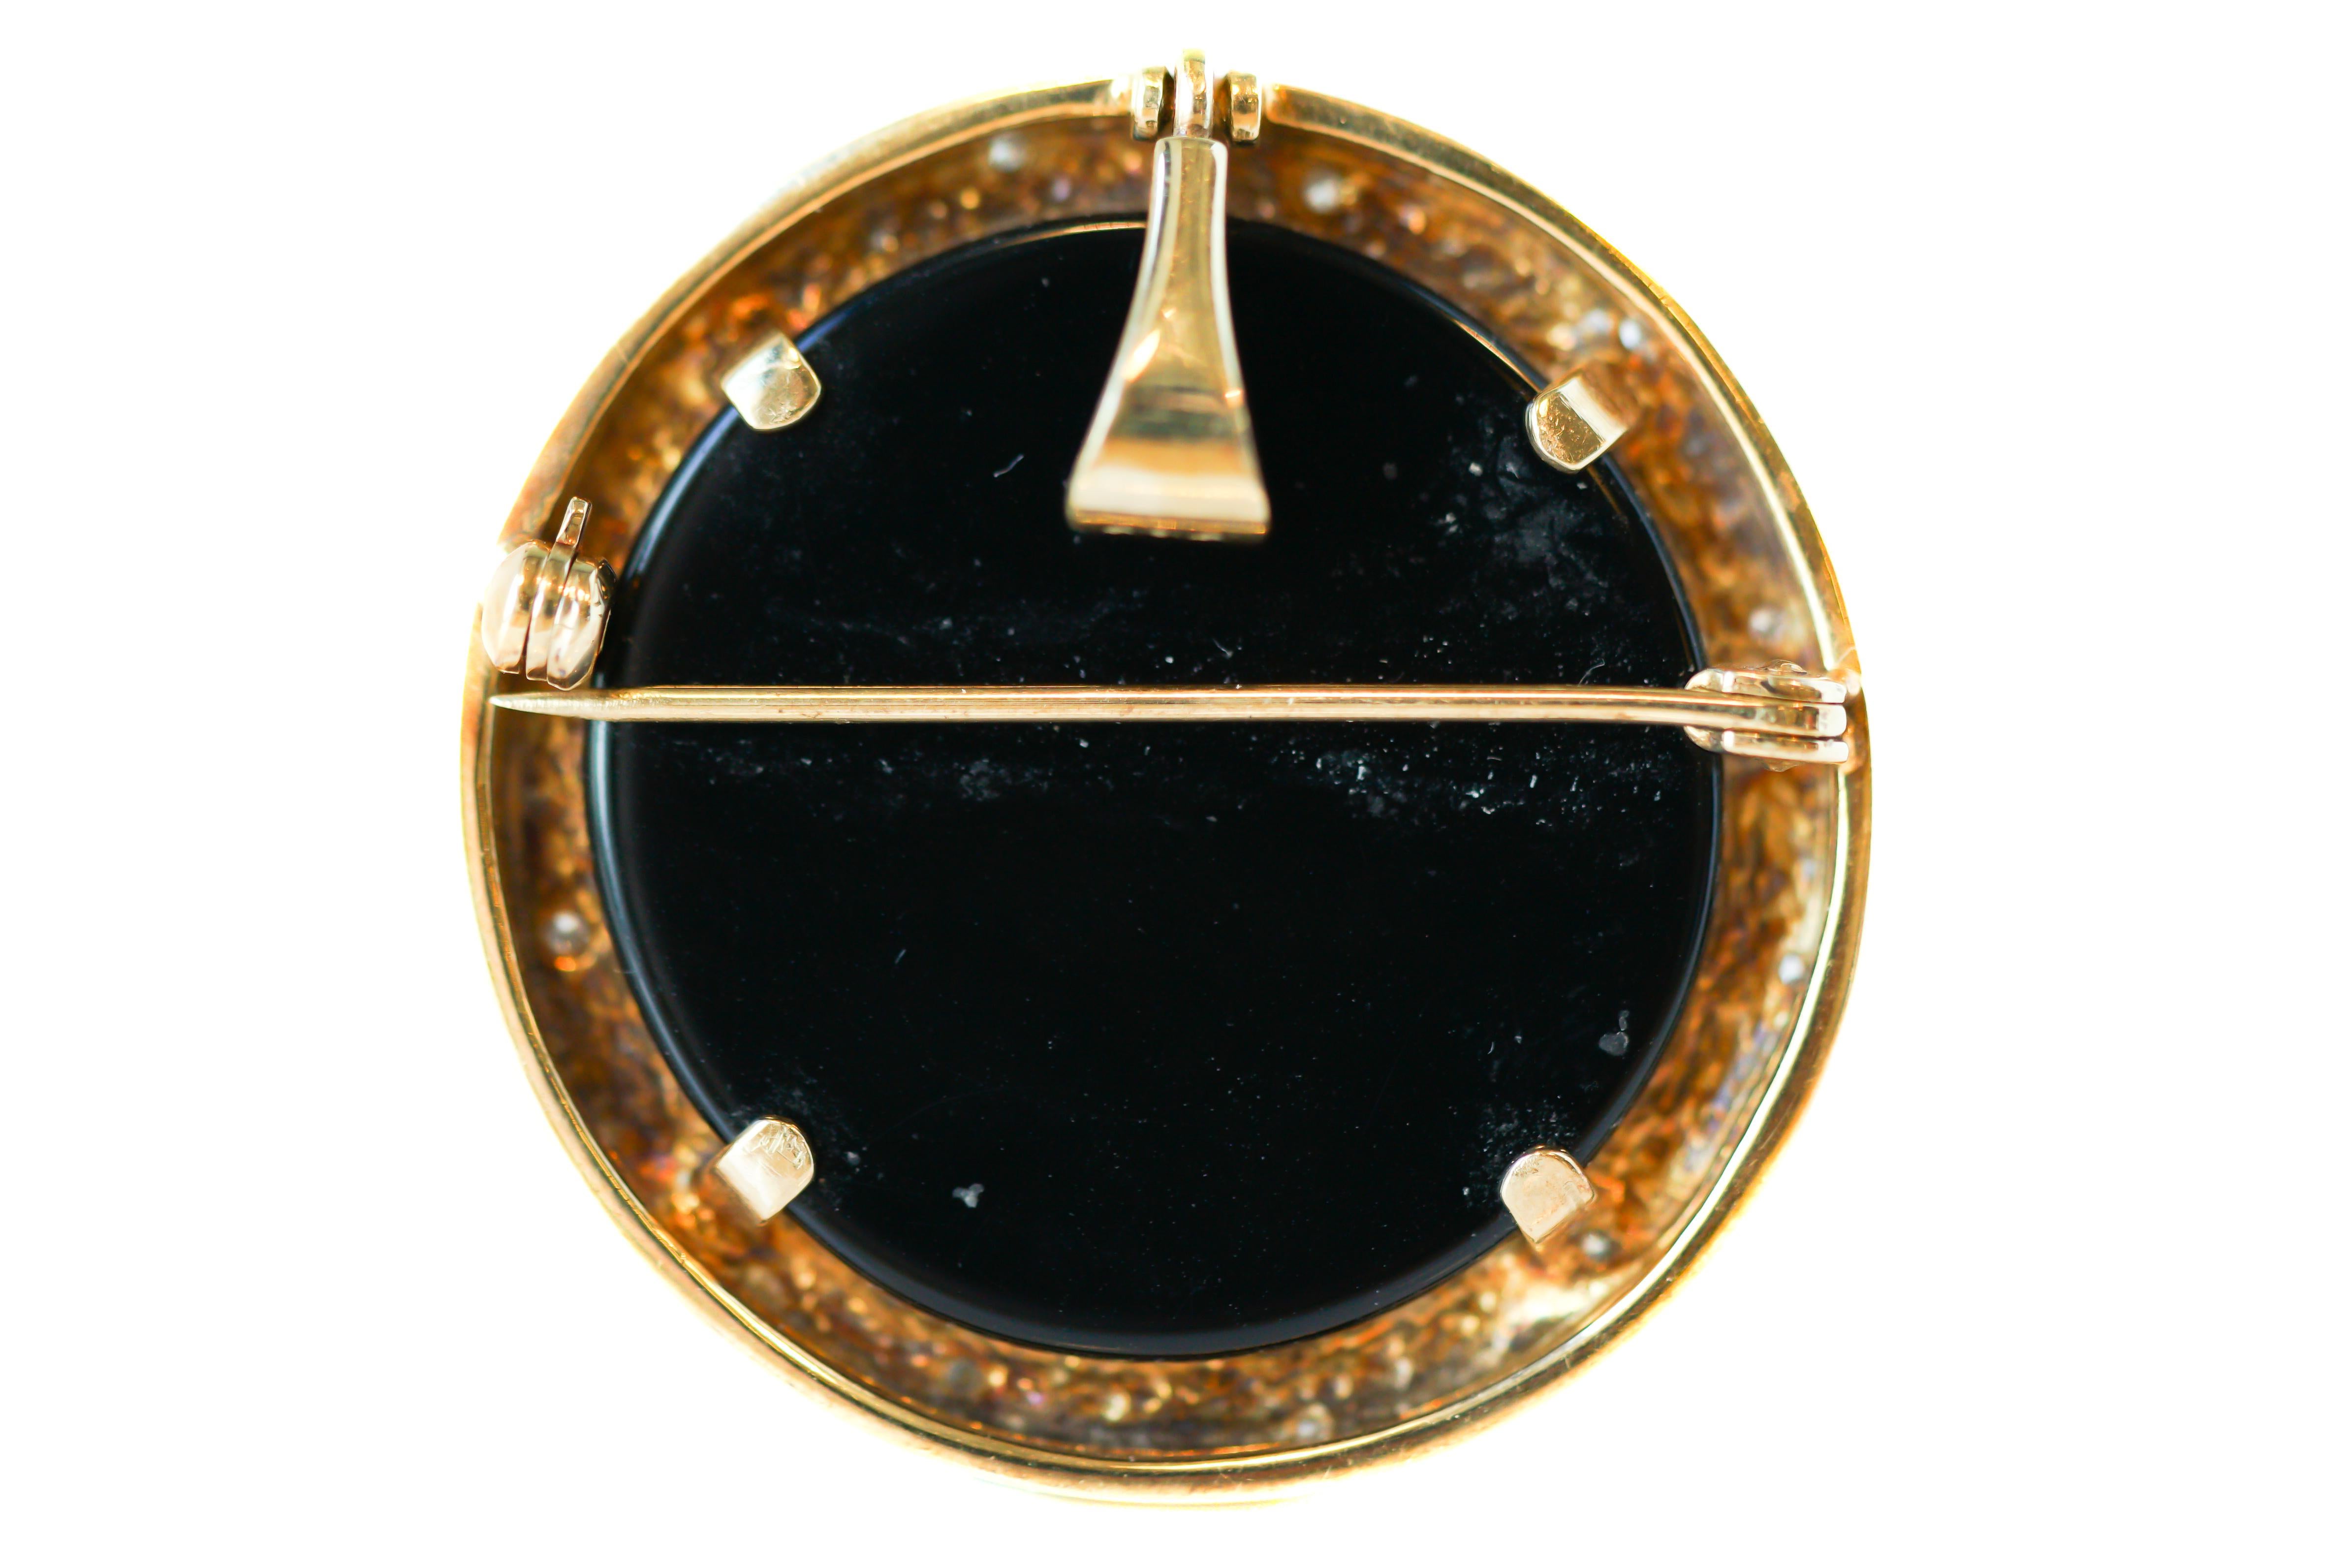 1940s Retro Cameo Brooch and Pendant - 14 Karat Yellow Gold, Diamonds

Features:
Blue and White Cameo Center piece
Cameo shows a Woman's head in profile with curling hair, wearing a floral garland. Cameo is set in a shining 14 Karat Yellow Gold